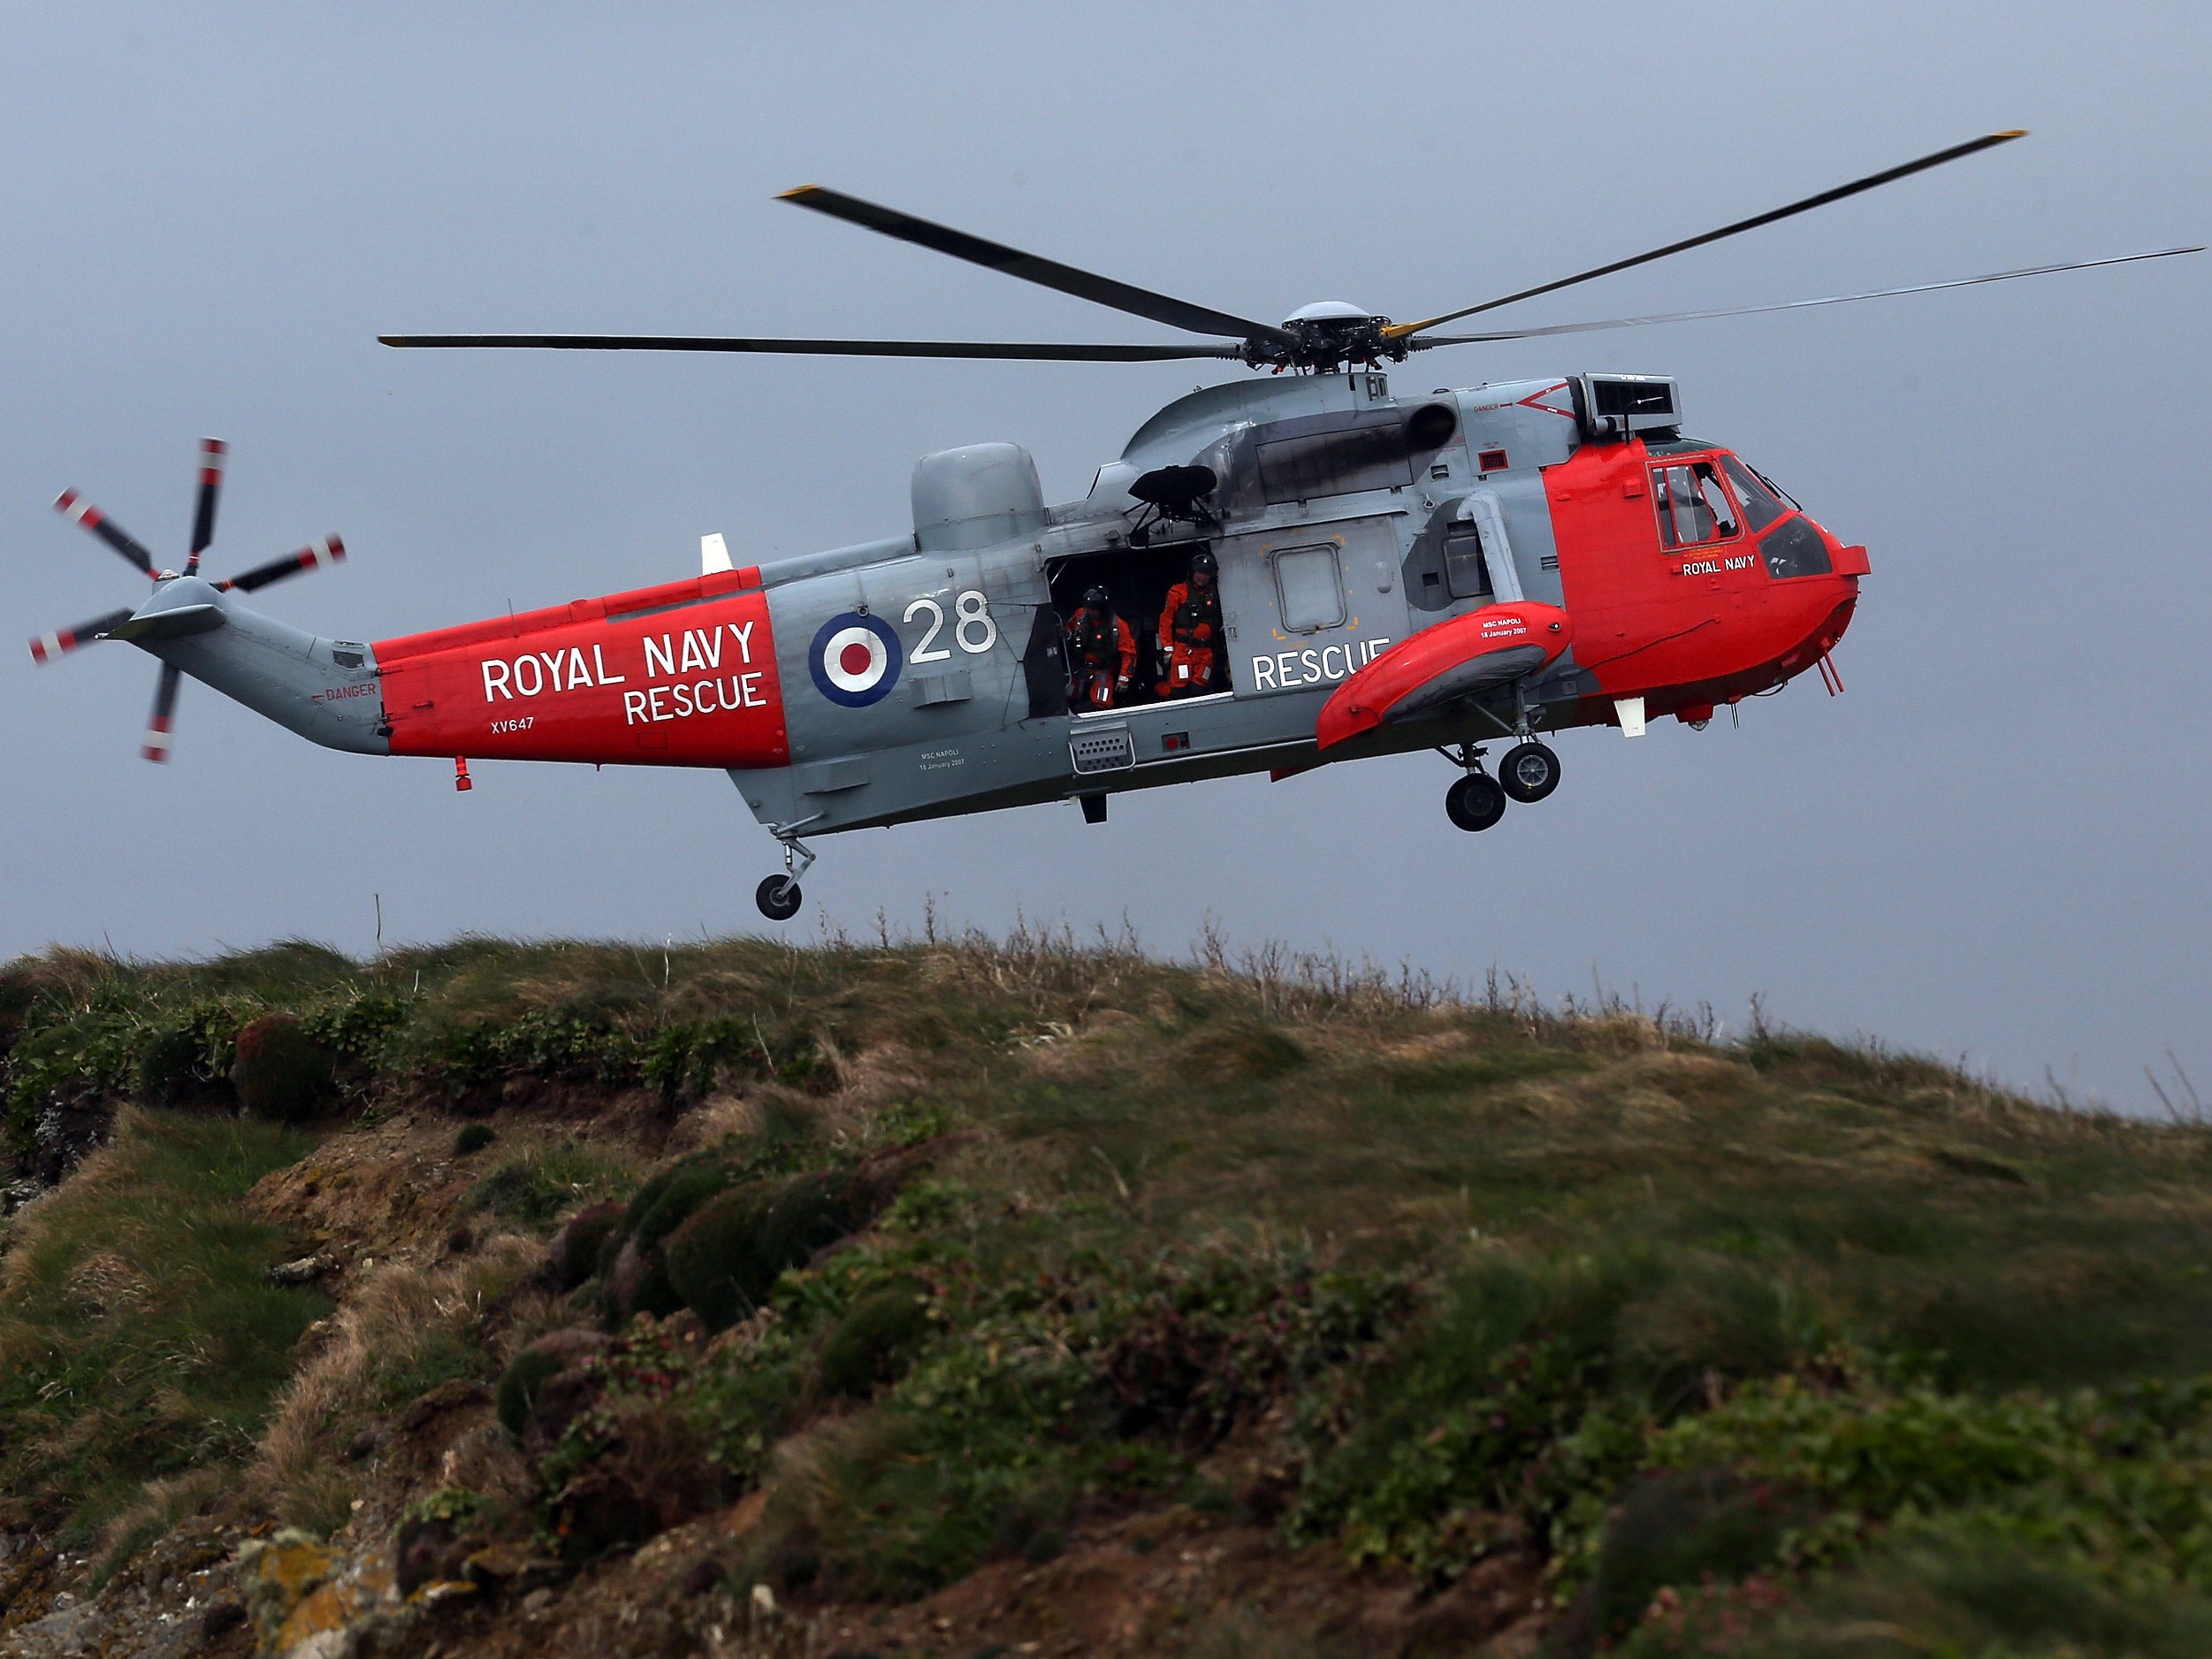 The coastguard and RAF are assisting in the search operations, police confirmed